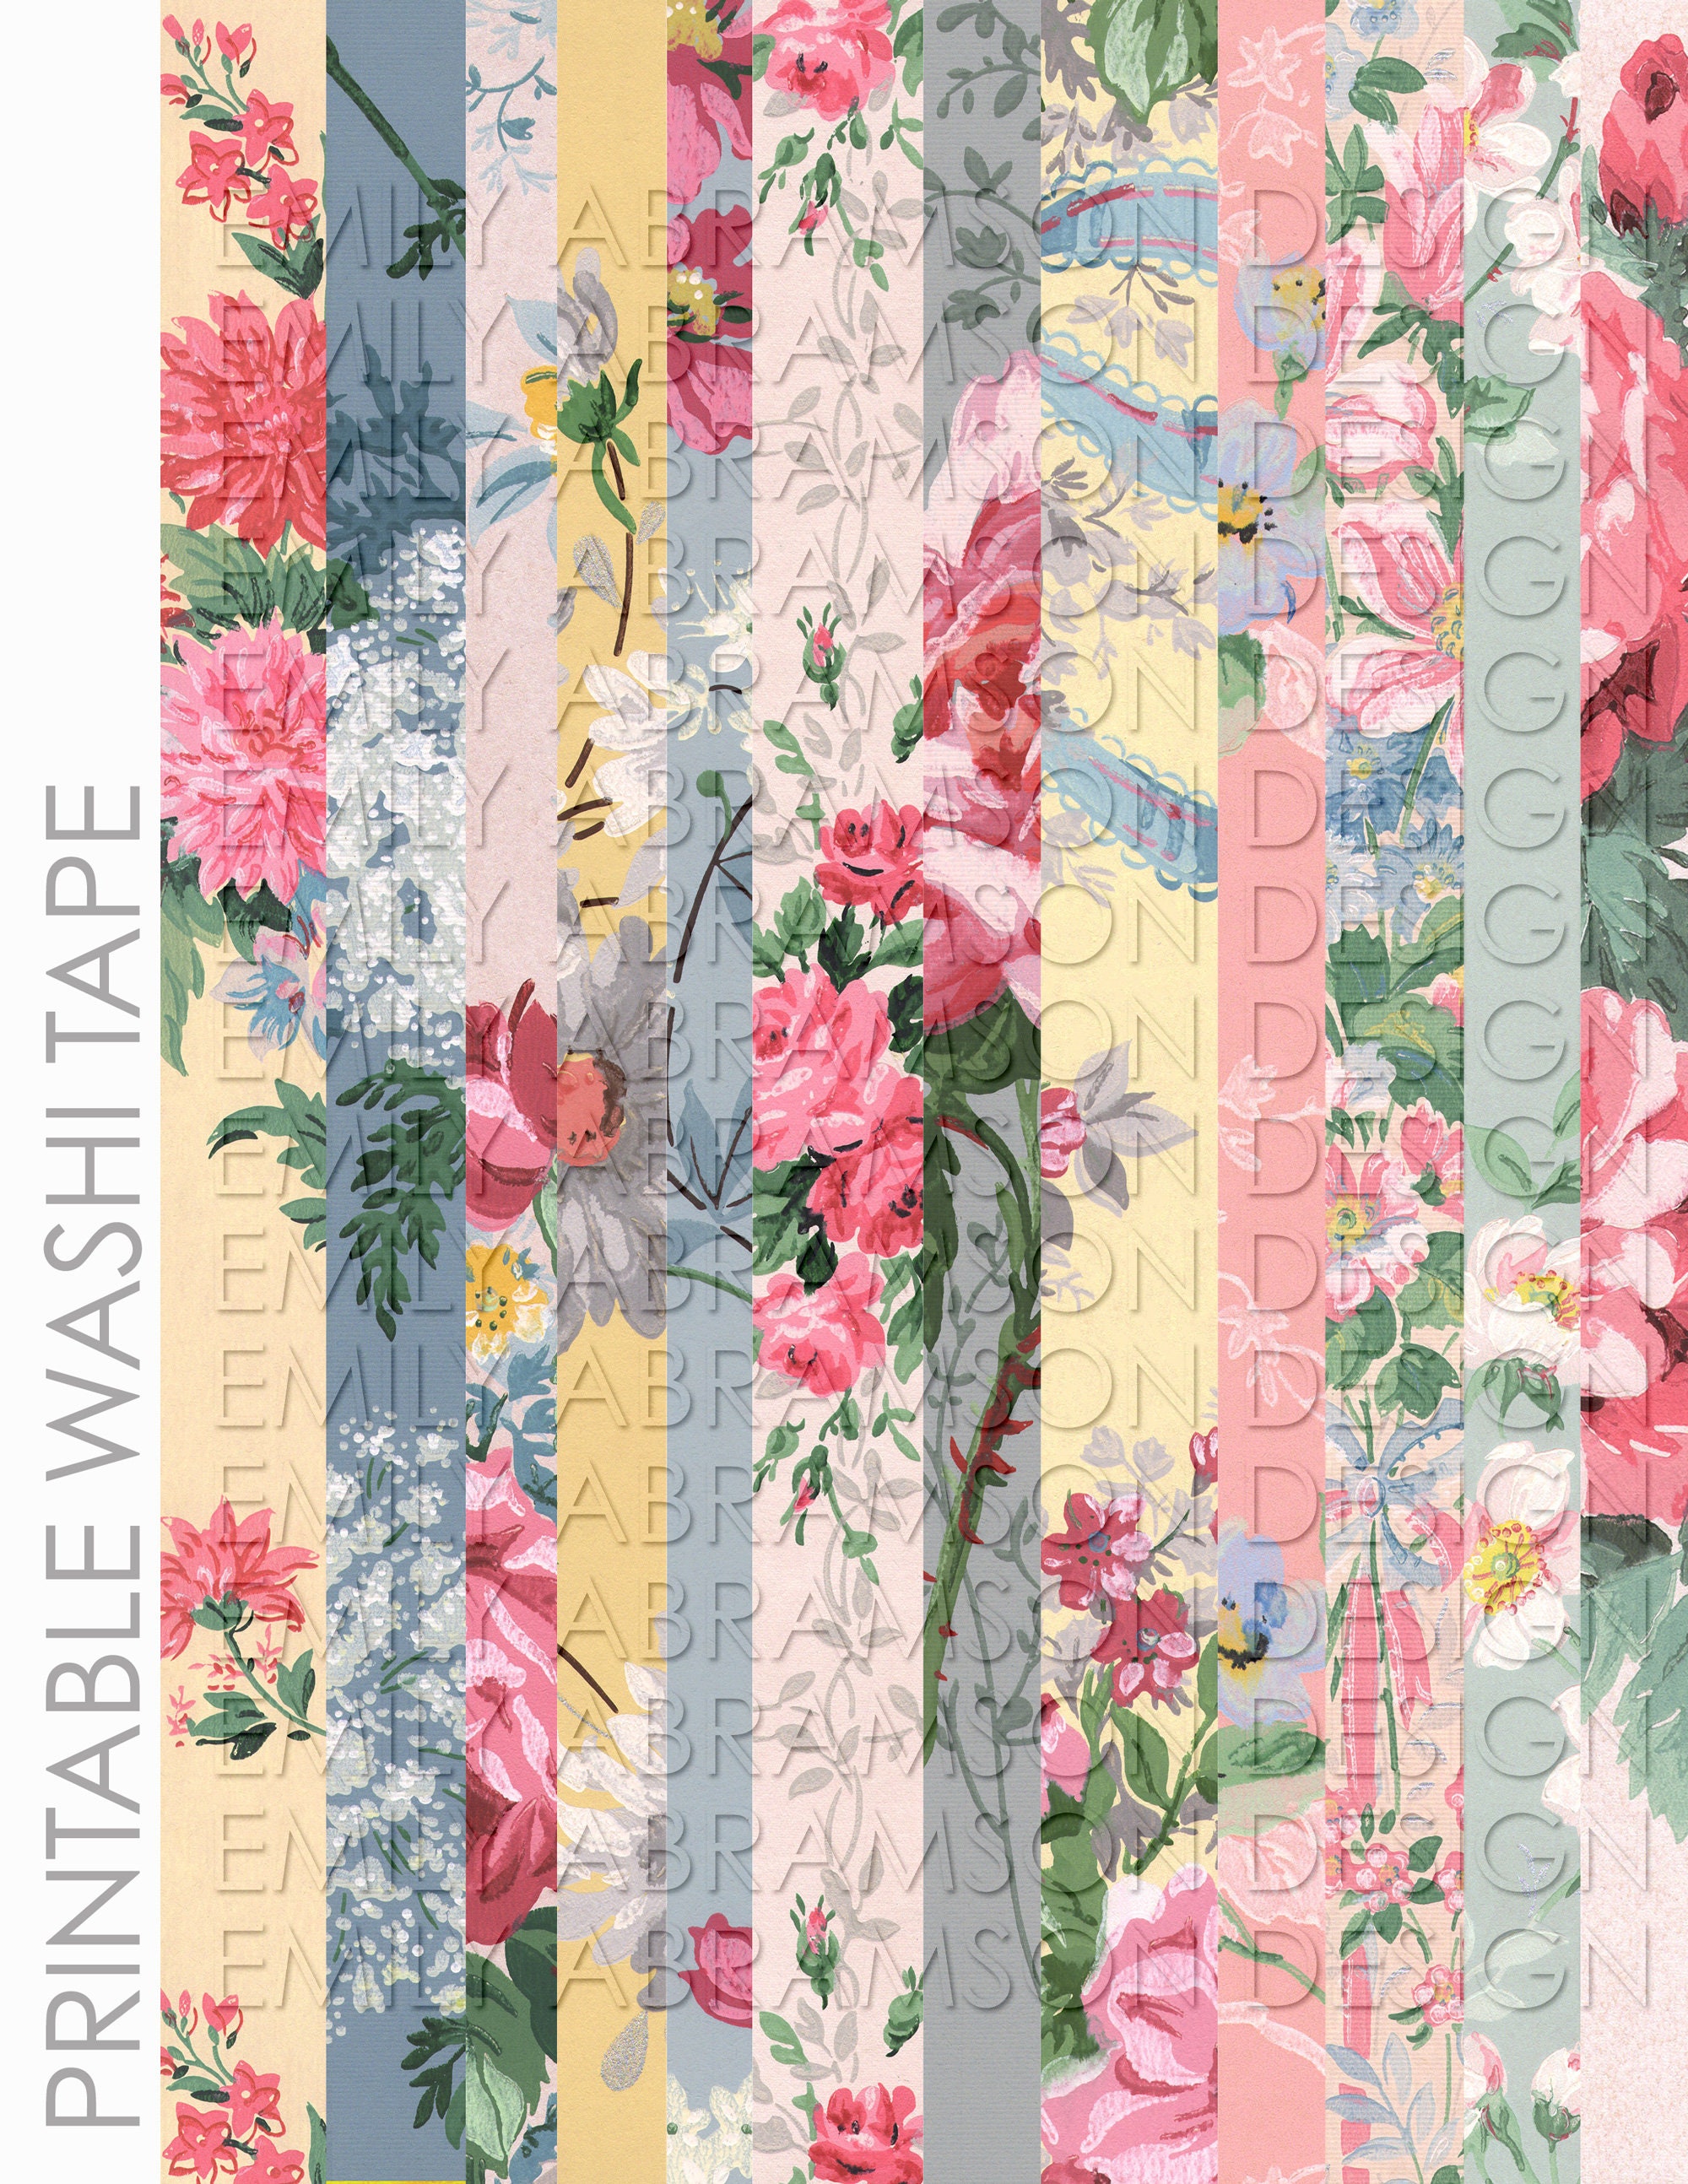 Floral Collage Printable Washi Tape 1 Digital Collage Sheet Printable For  Junk Journaling, Planners, and Digital Scrapbooking